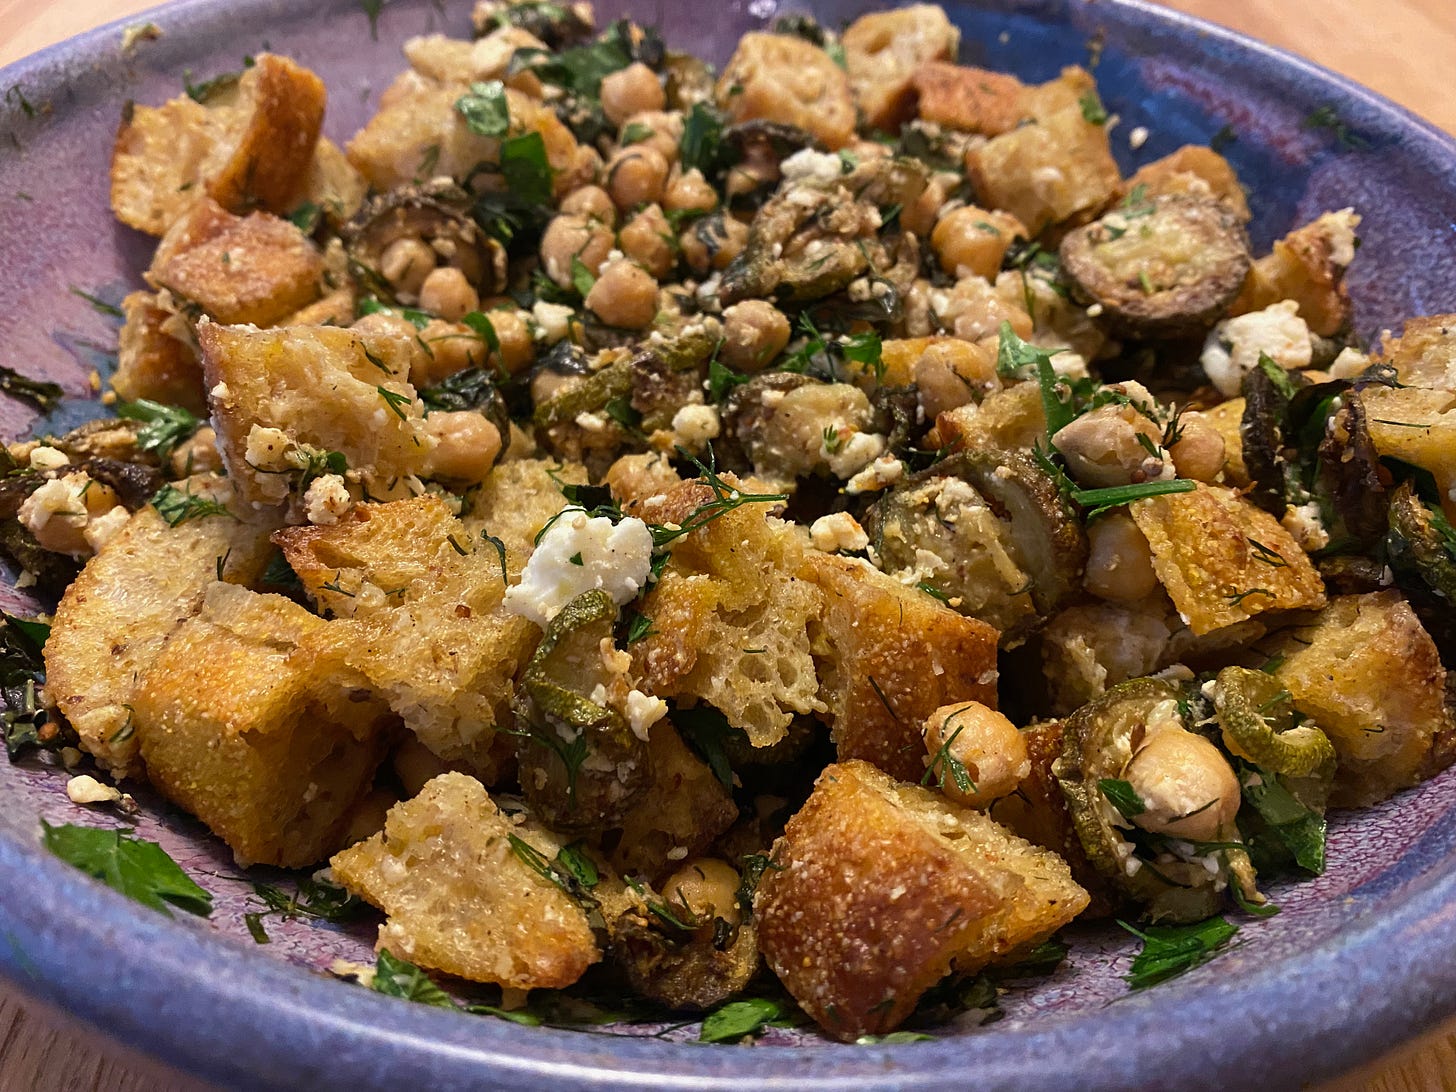 Closeup of a purple ceramic serving bowl filled with crispy fried bread, chickpeas, chopped herbs, and crumbled feta.